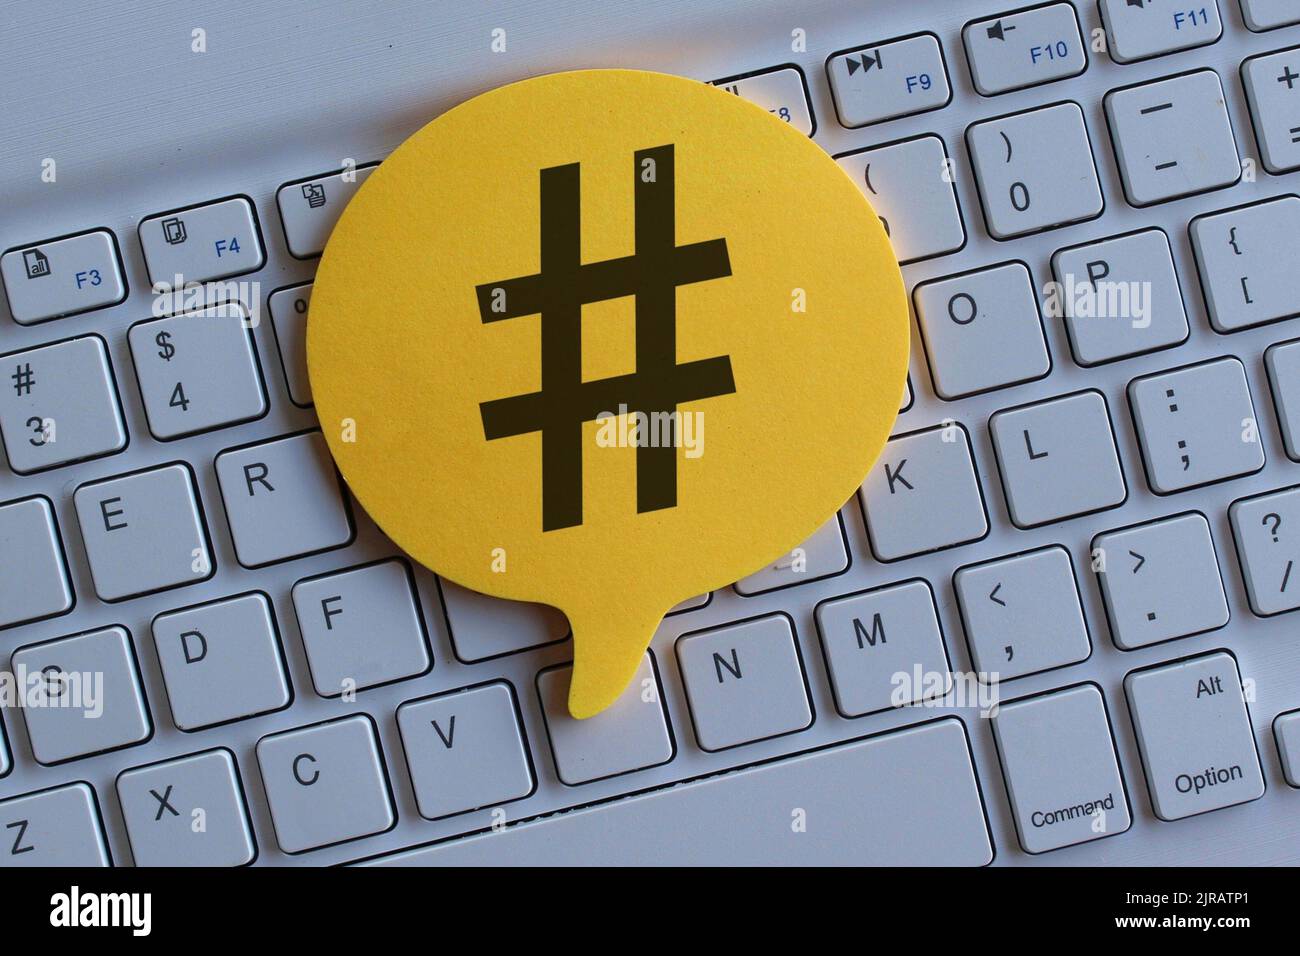 Top view image of computer keyboard and speech bubble with hashtag icon. Stock Photo